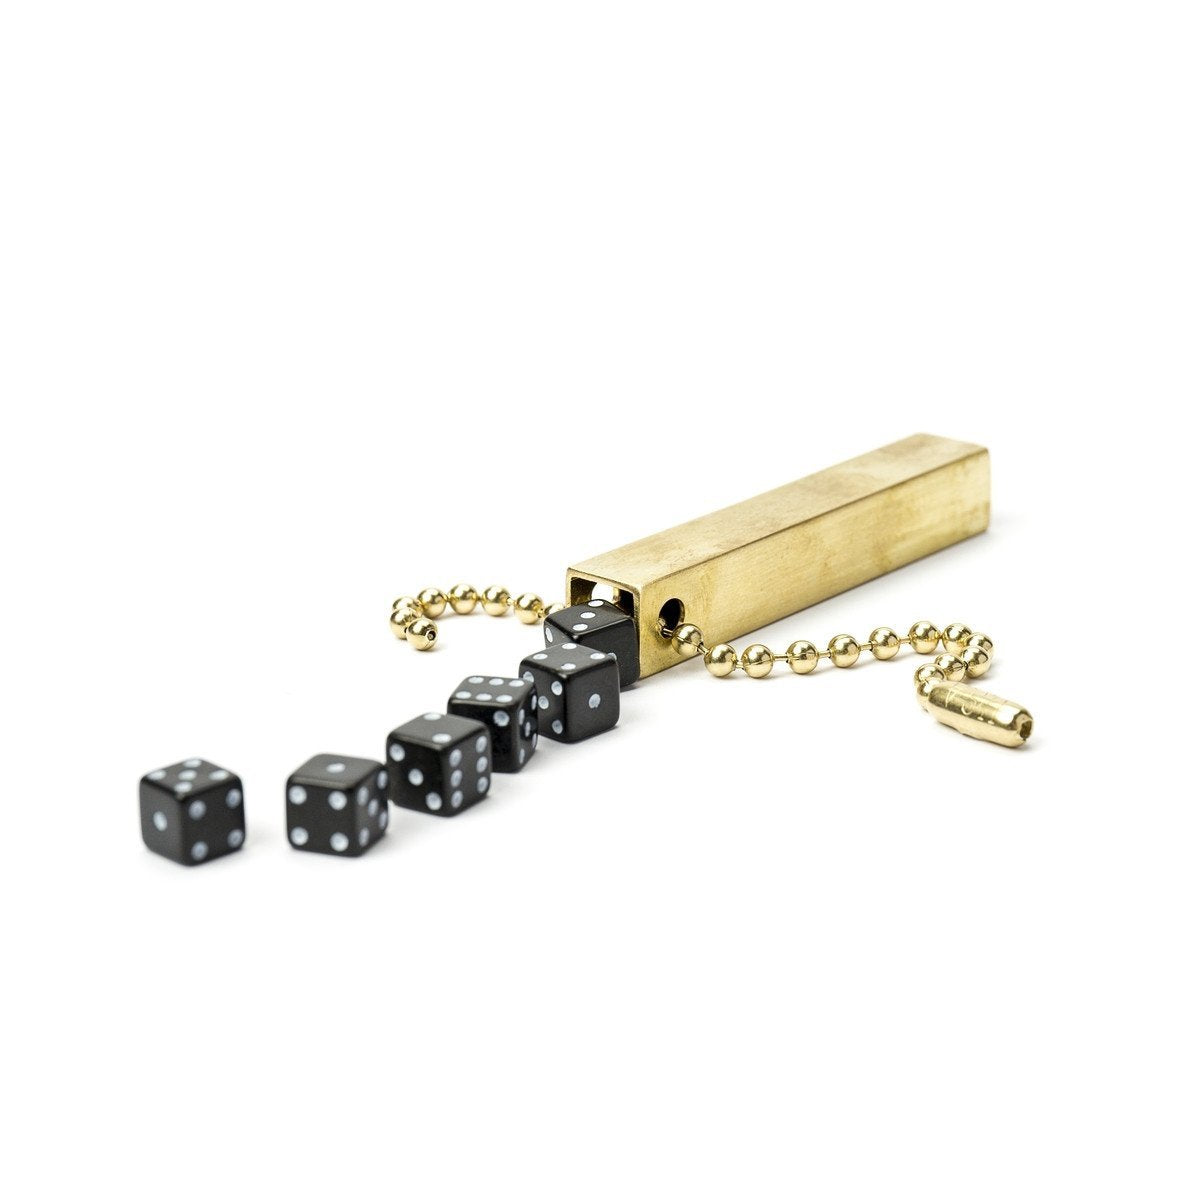 White background variant photo of brass travel dice with black dice and a keychain